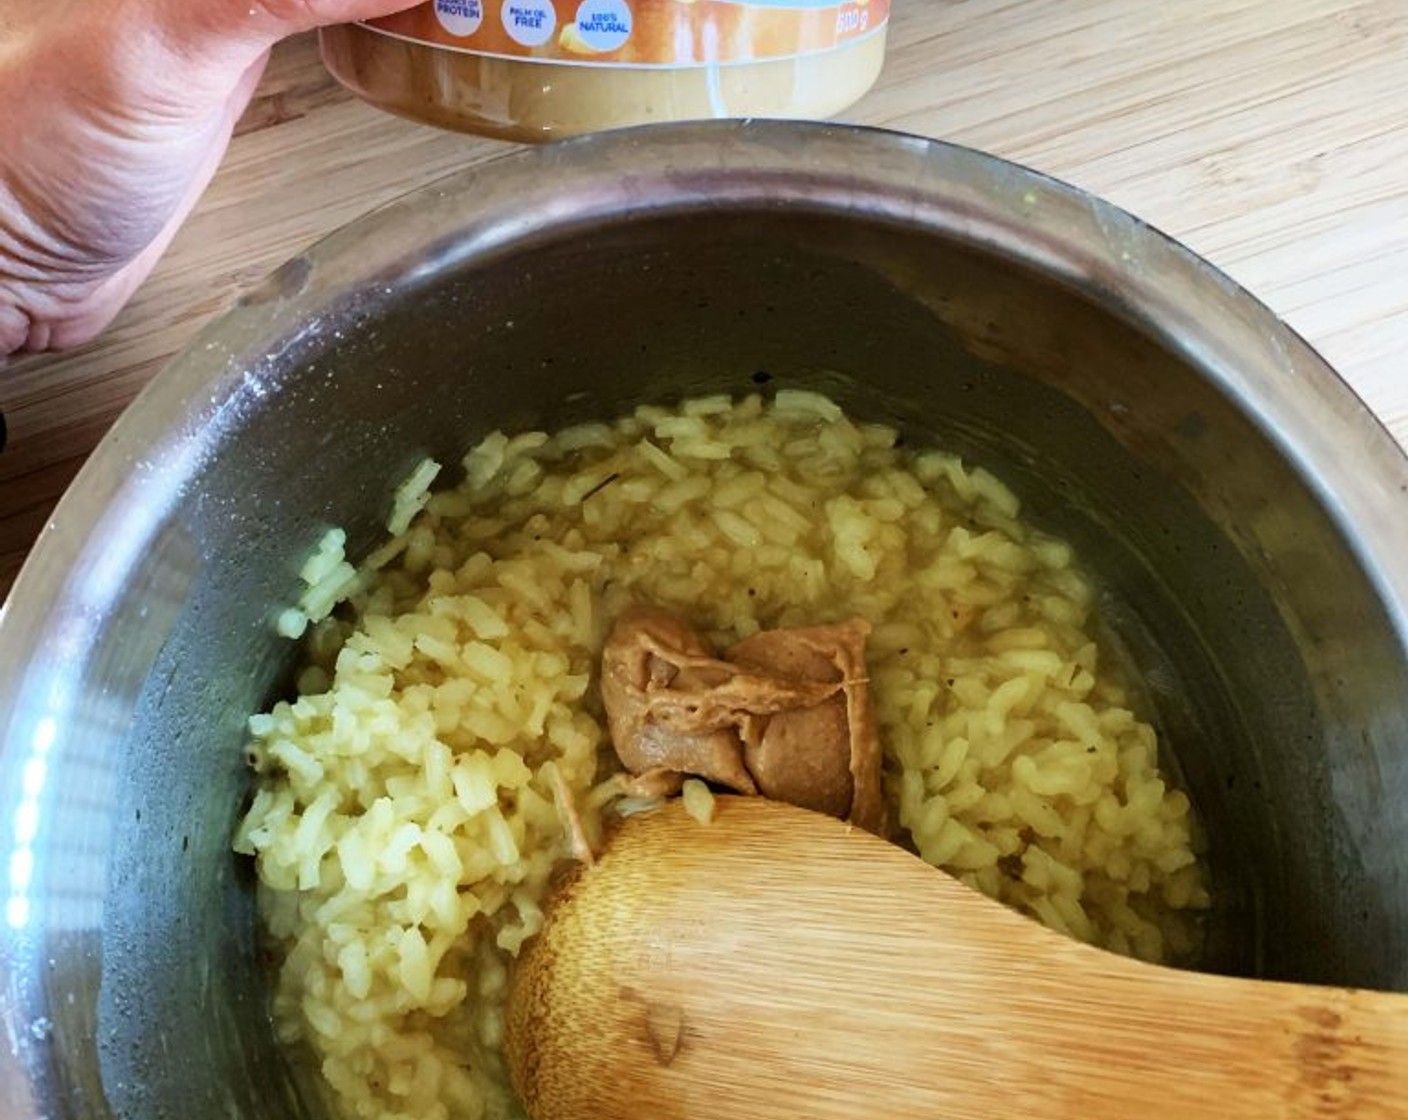 step 5 Add in the Creamy Peanut Butter (1 Tbsp) and stir fast using a whisk. This will help get a very creamy risotto. Cover with a lid and let it sit for 2-3 minutes.